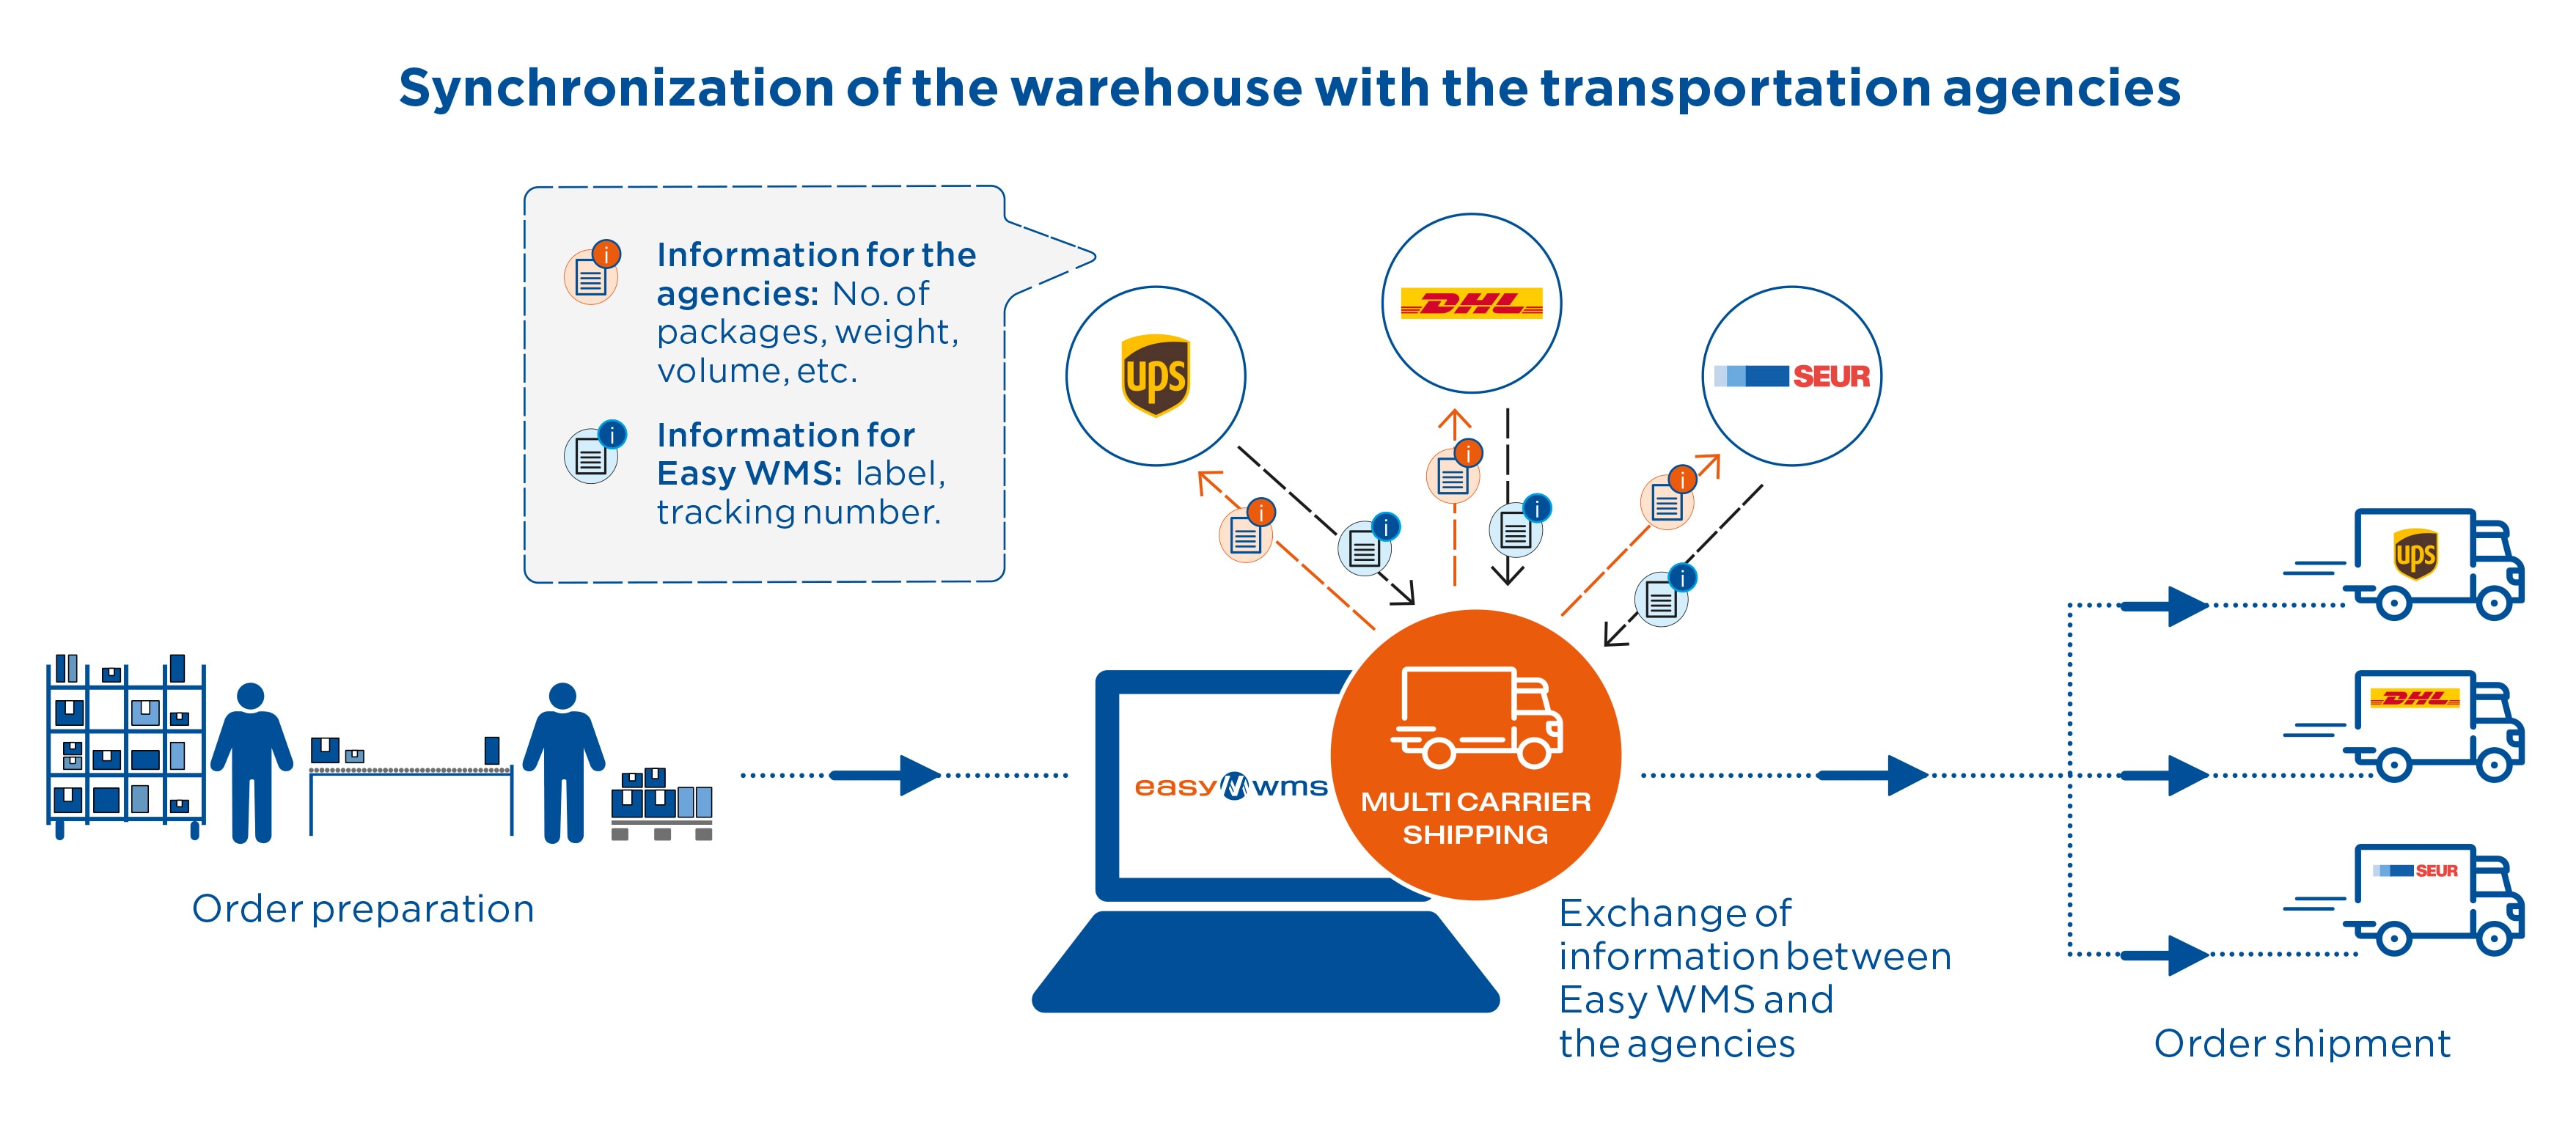 Synchronization of the warehouse with the transport agencies